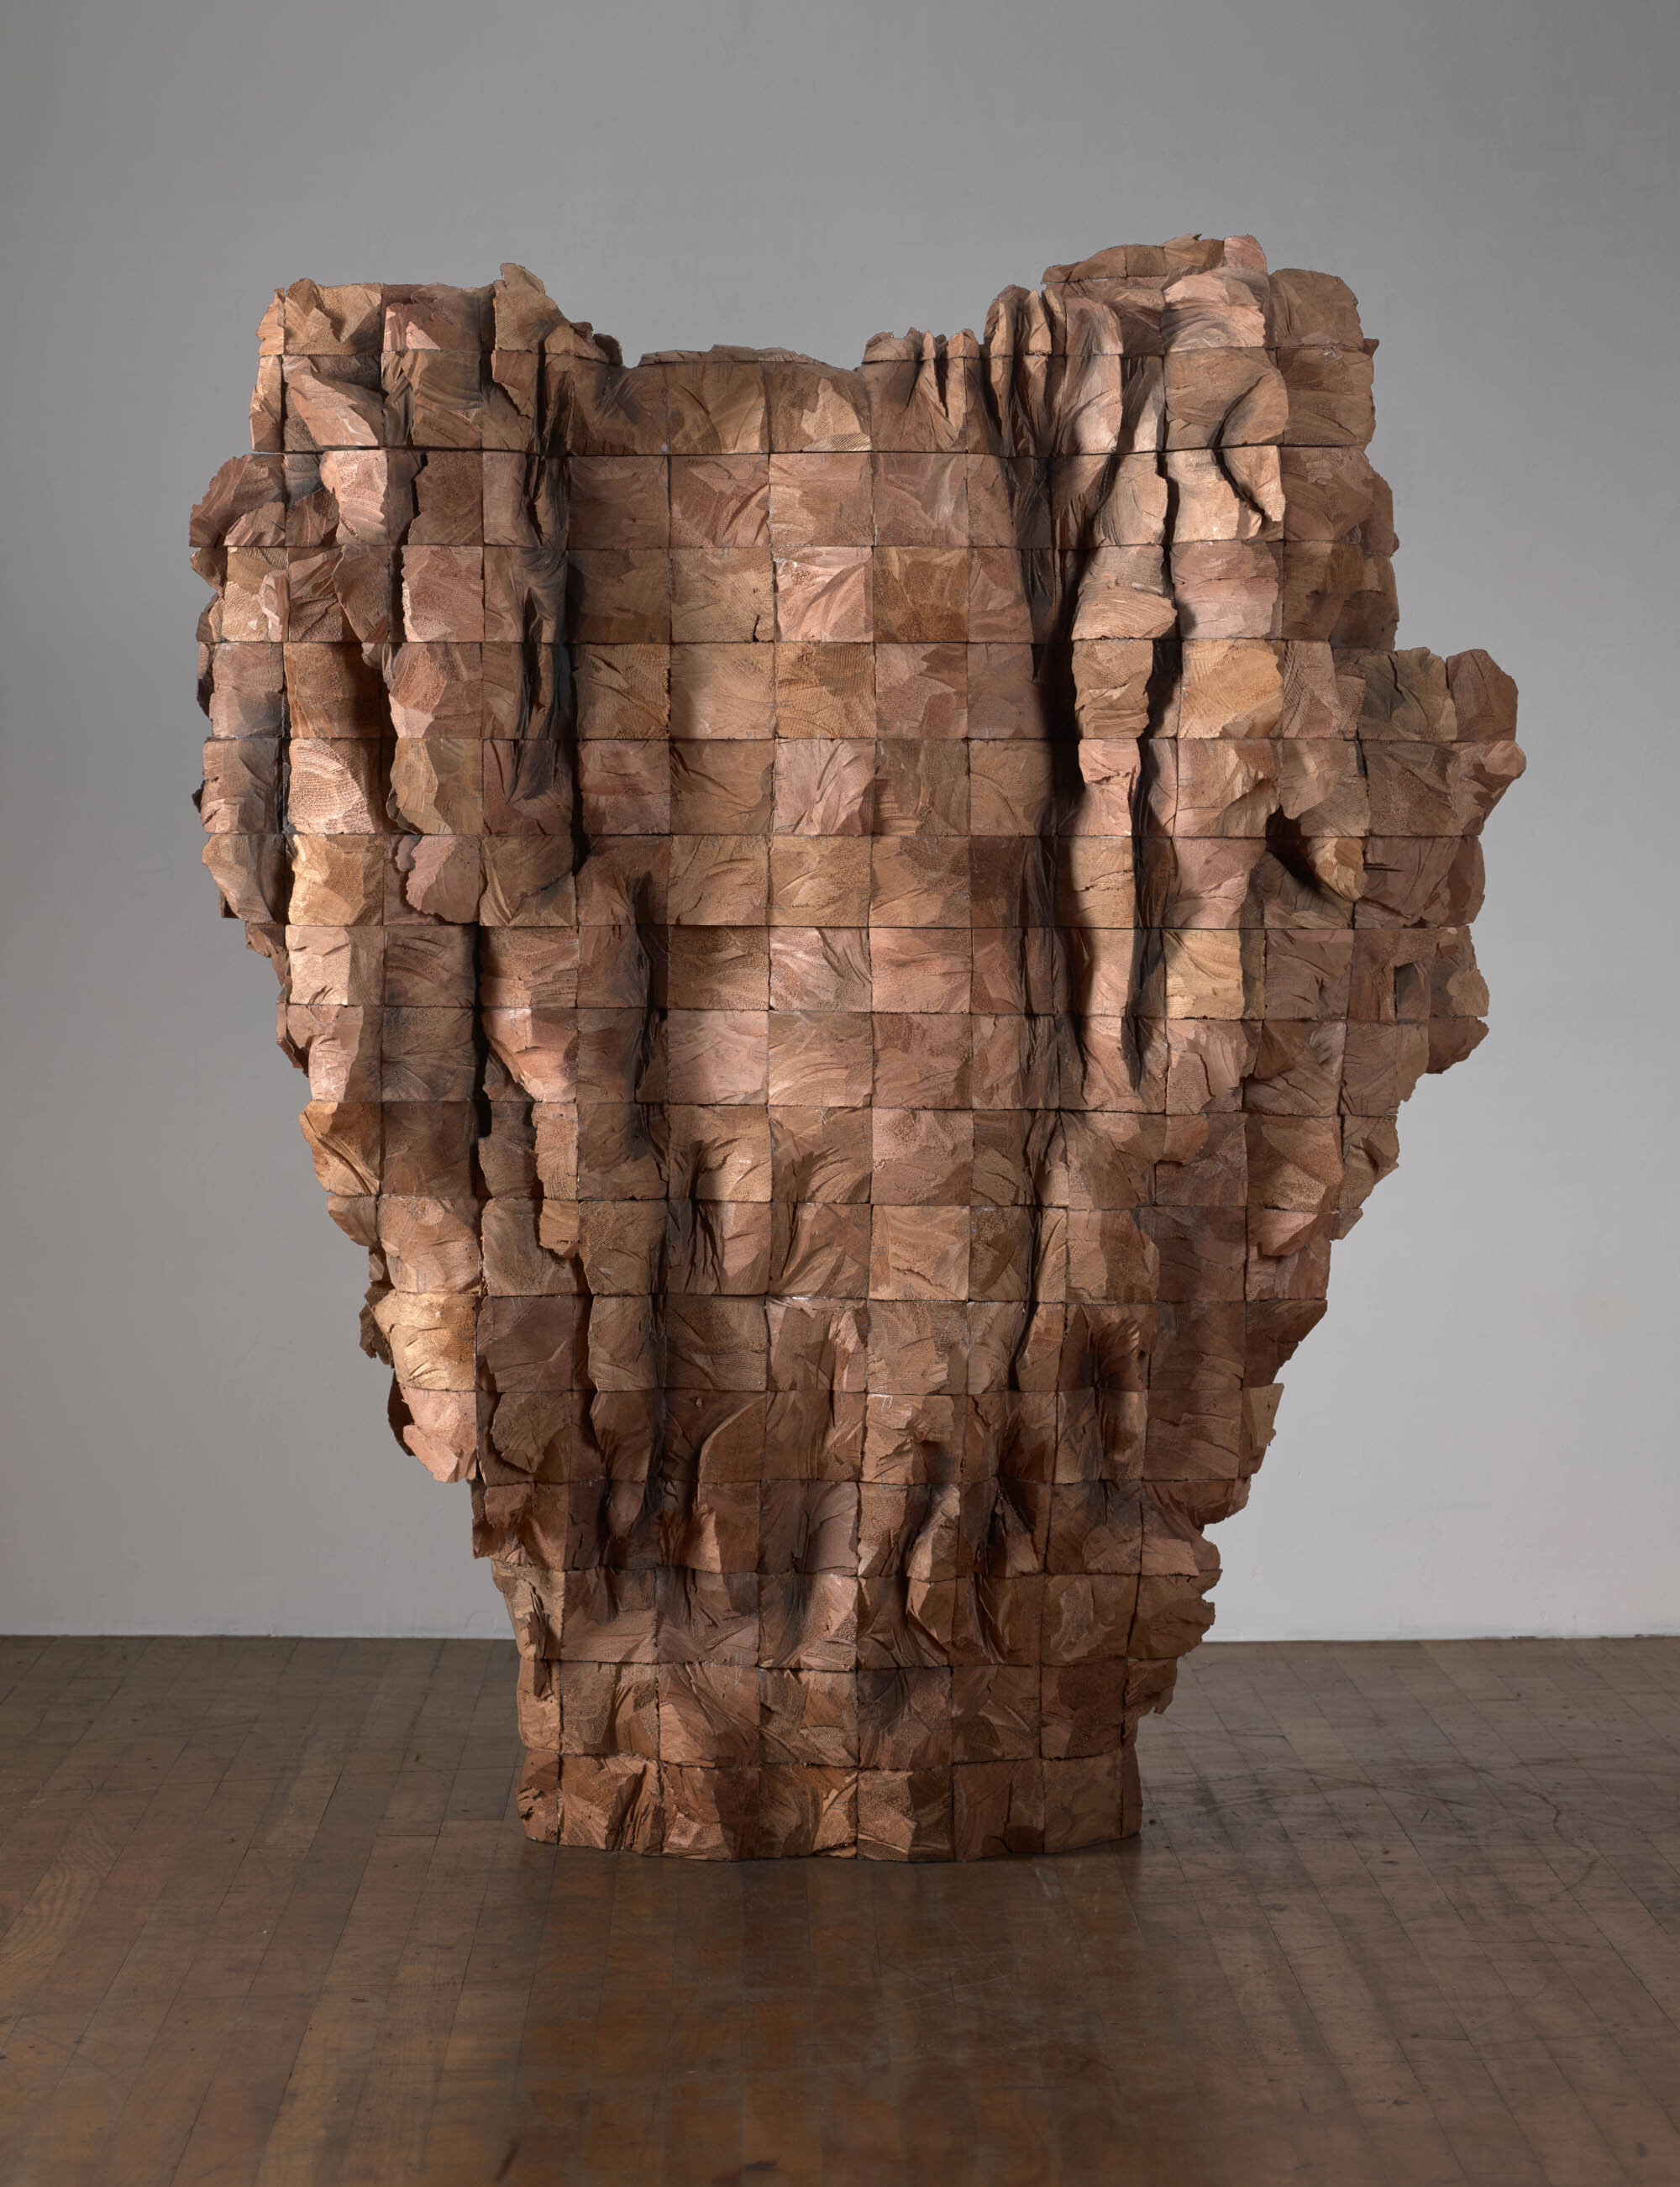       Tak , 2015 Cedar 62 x 50 x 26 in.    MORE IMAGES   National Museum Of Women In The Arts  